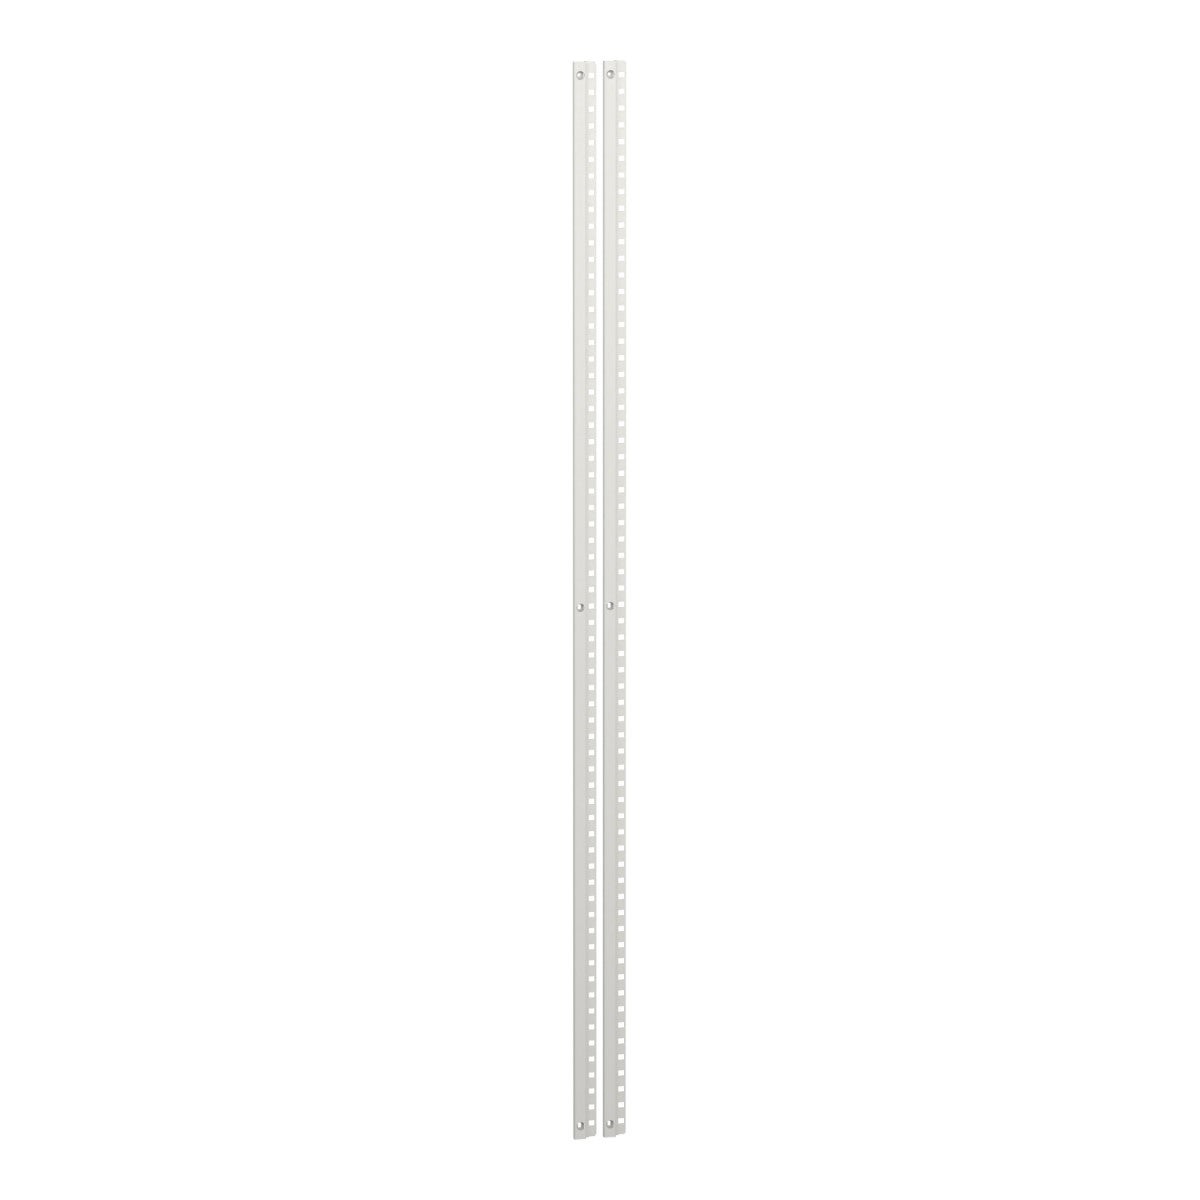 Front cover support upright, PrismaSeT G, 2 Plate Uprights, 33M, IP30, for enclosure W600mm/850mm, white, RAL 9001